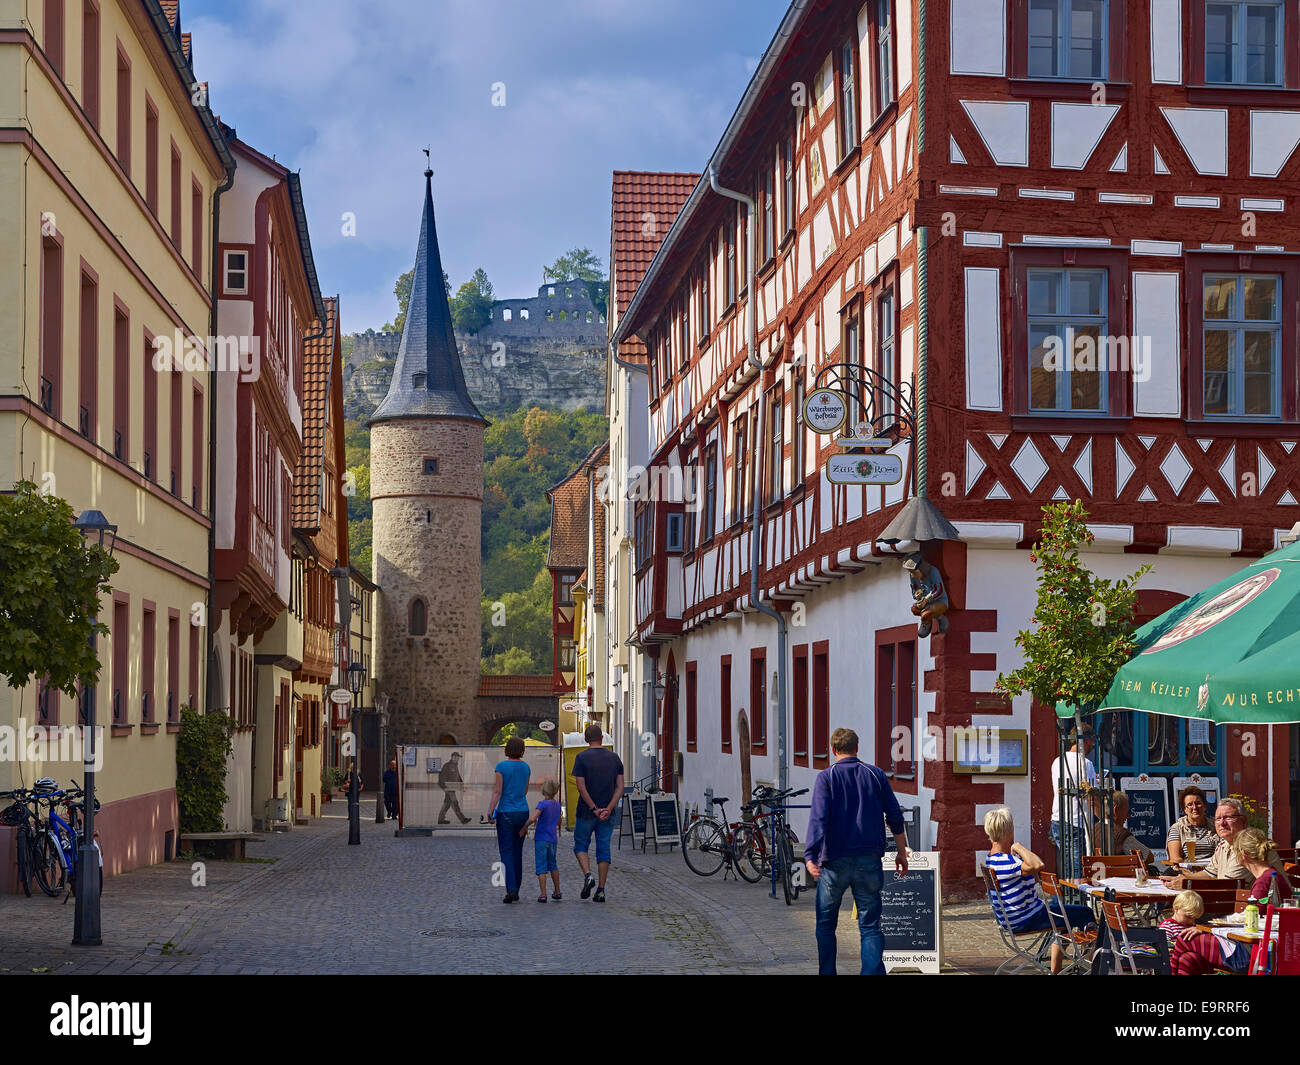 Maingasse with Main Gate in Karlstadt, Germany Stock Photo